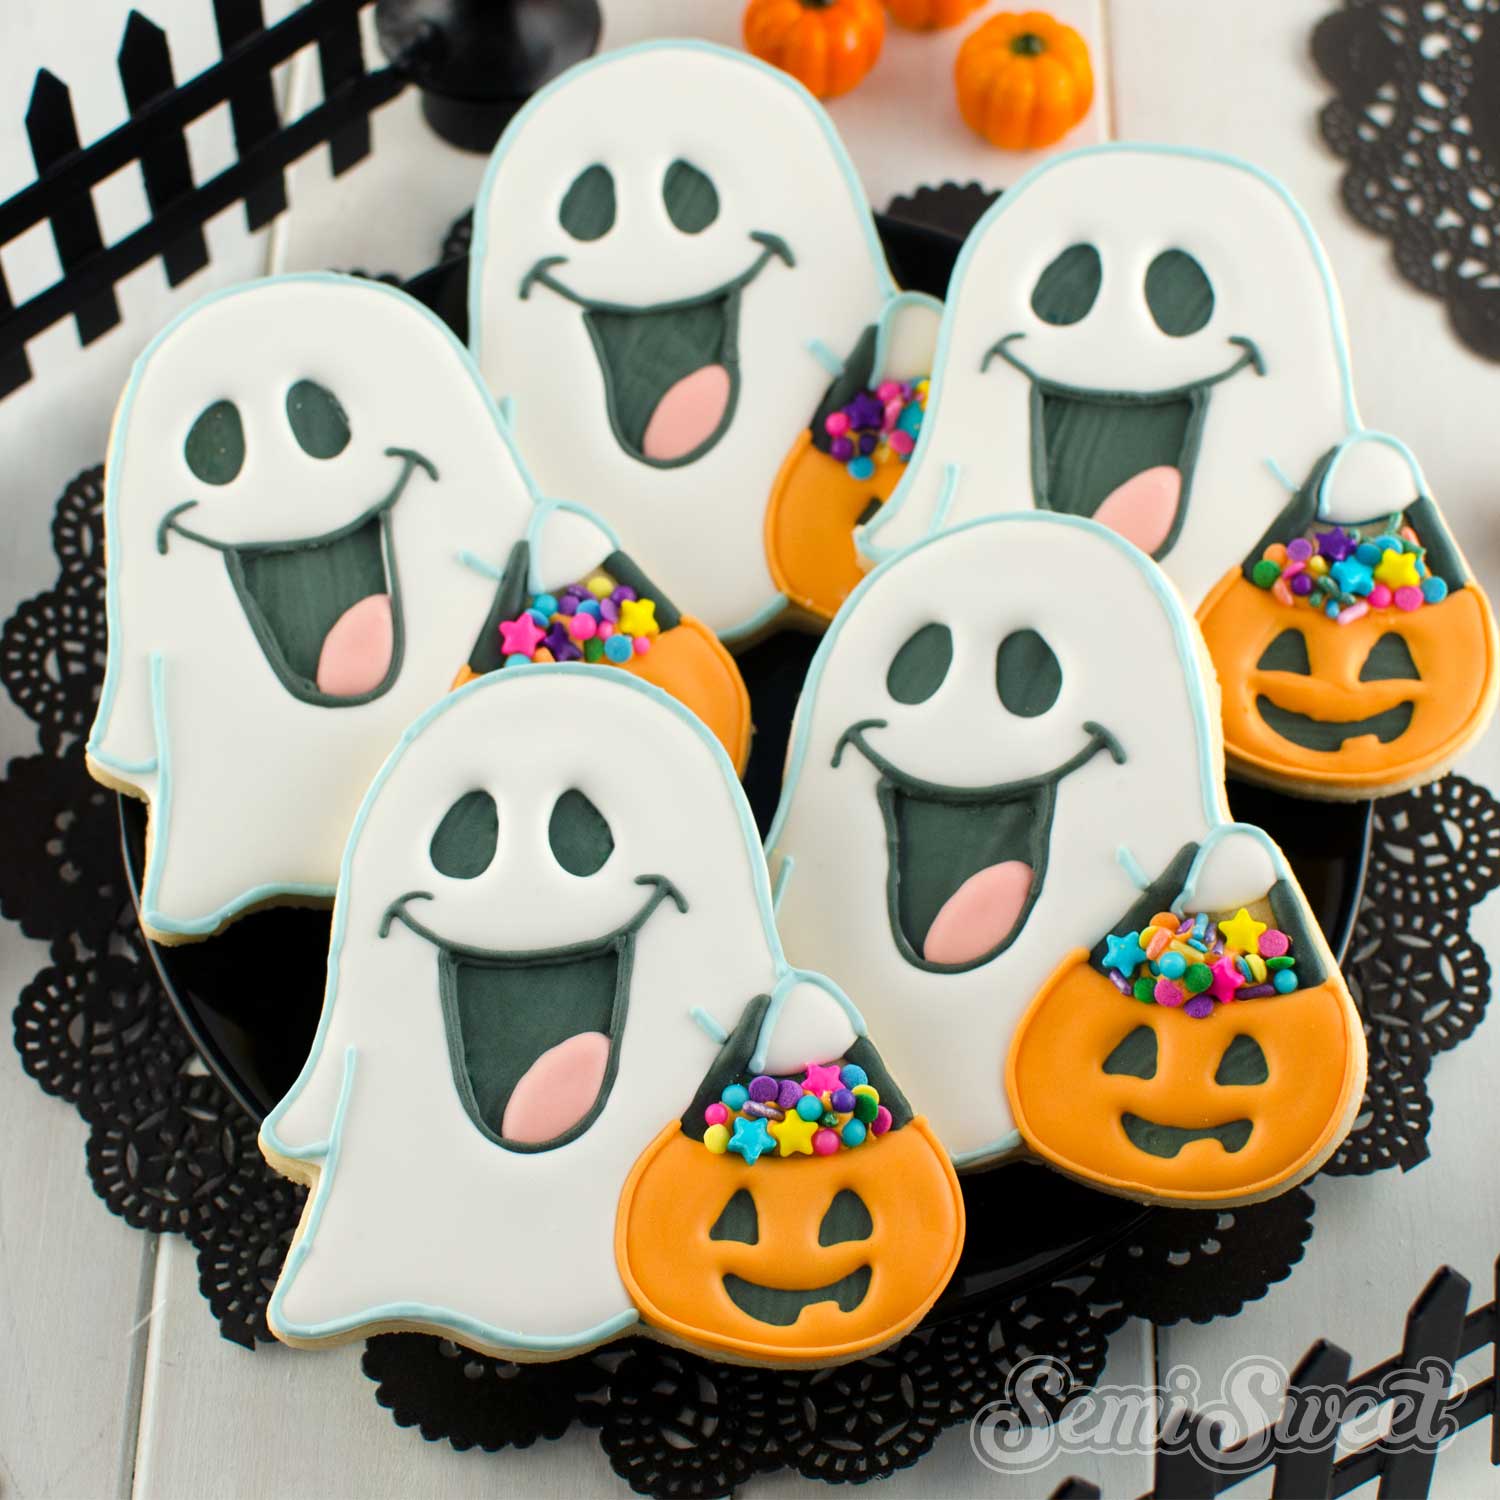 31 Days of Halloween Mini Cookie Cutters - Set of 31!